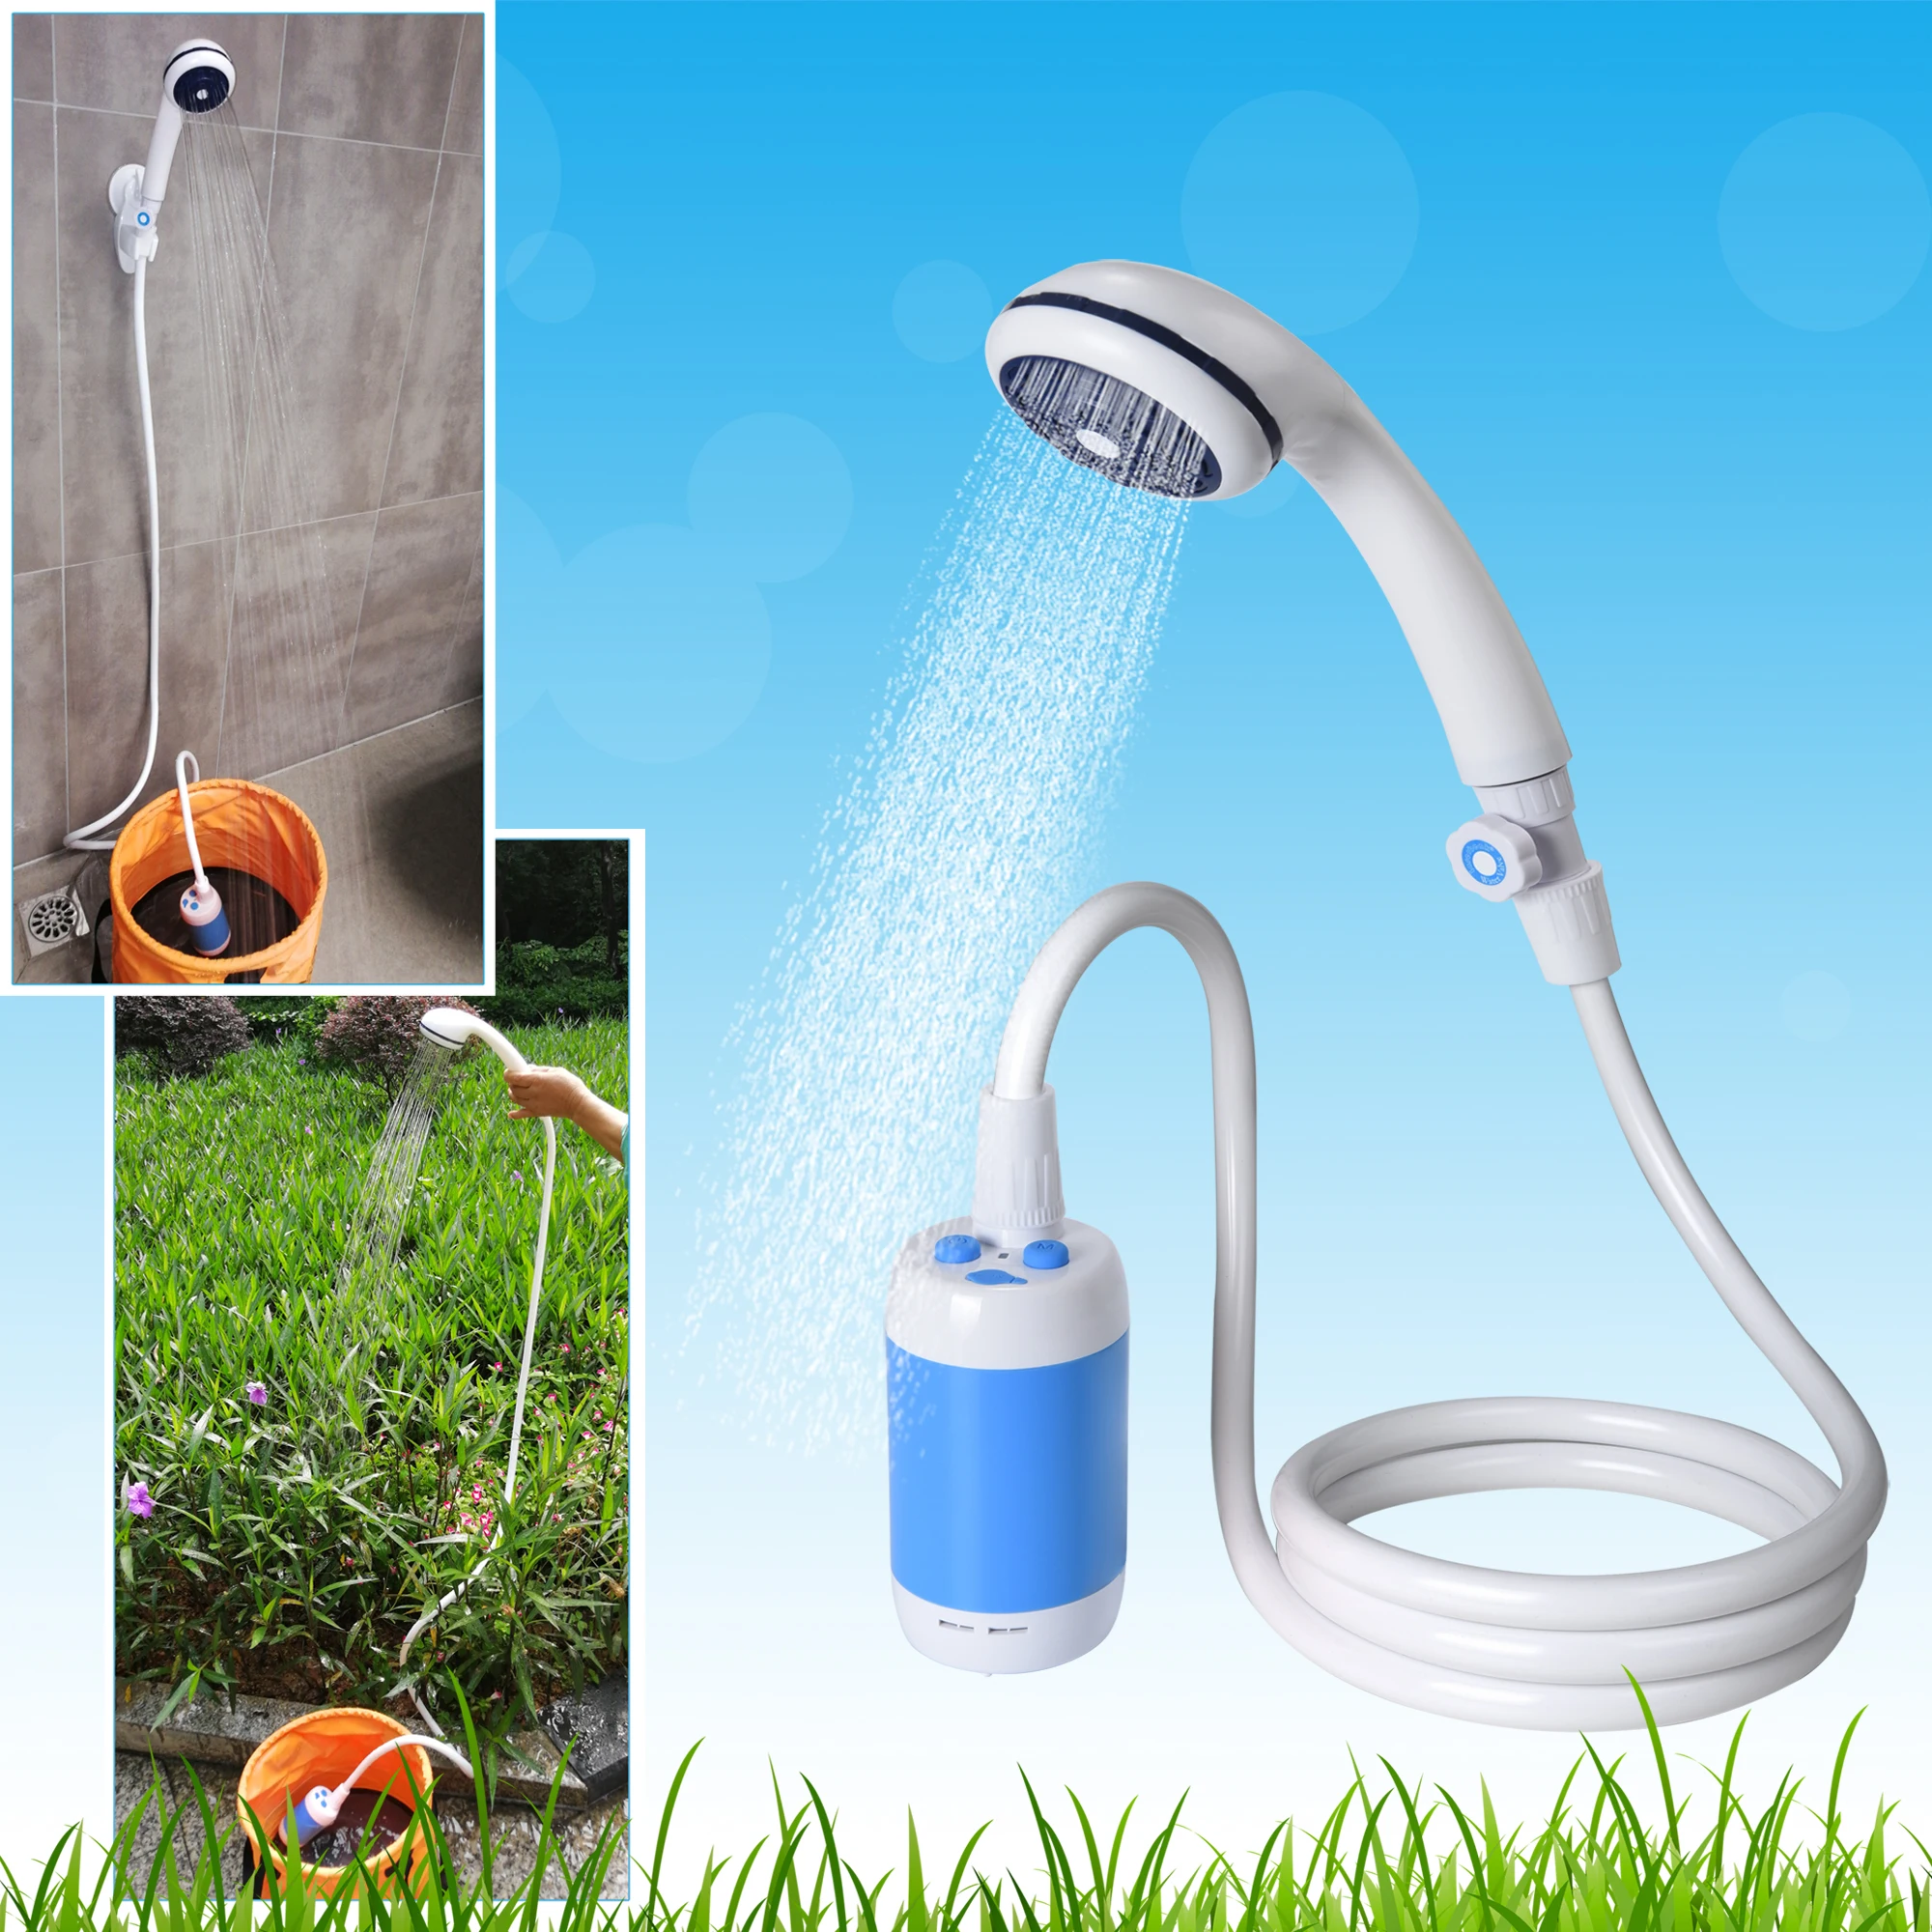 Portable Shower Camp Shower student dormitory outdoor Camping Shower pet Shower Rechargeable Shower high Capacity preview-7